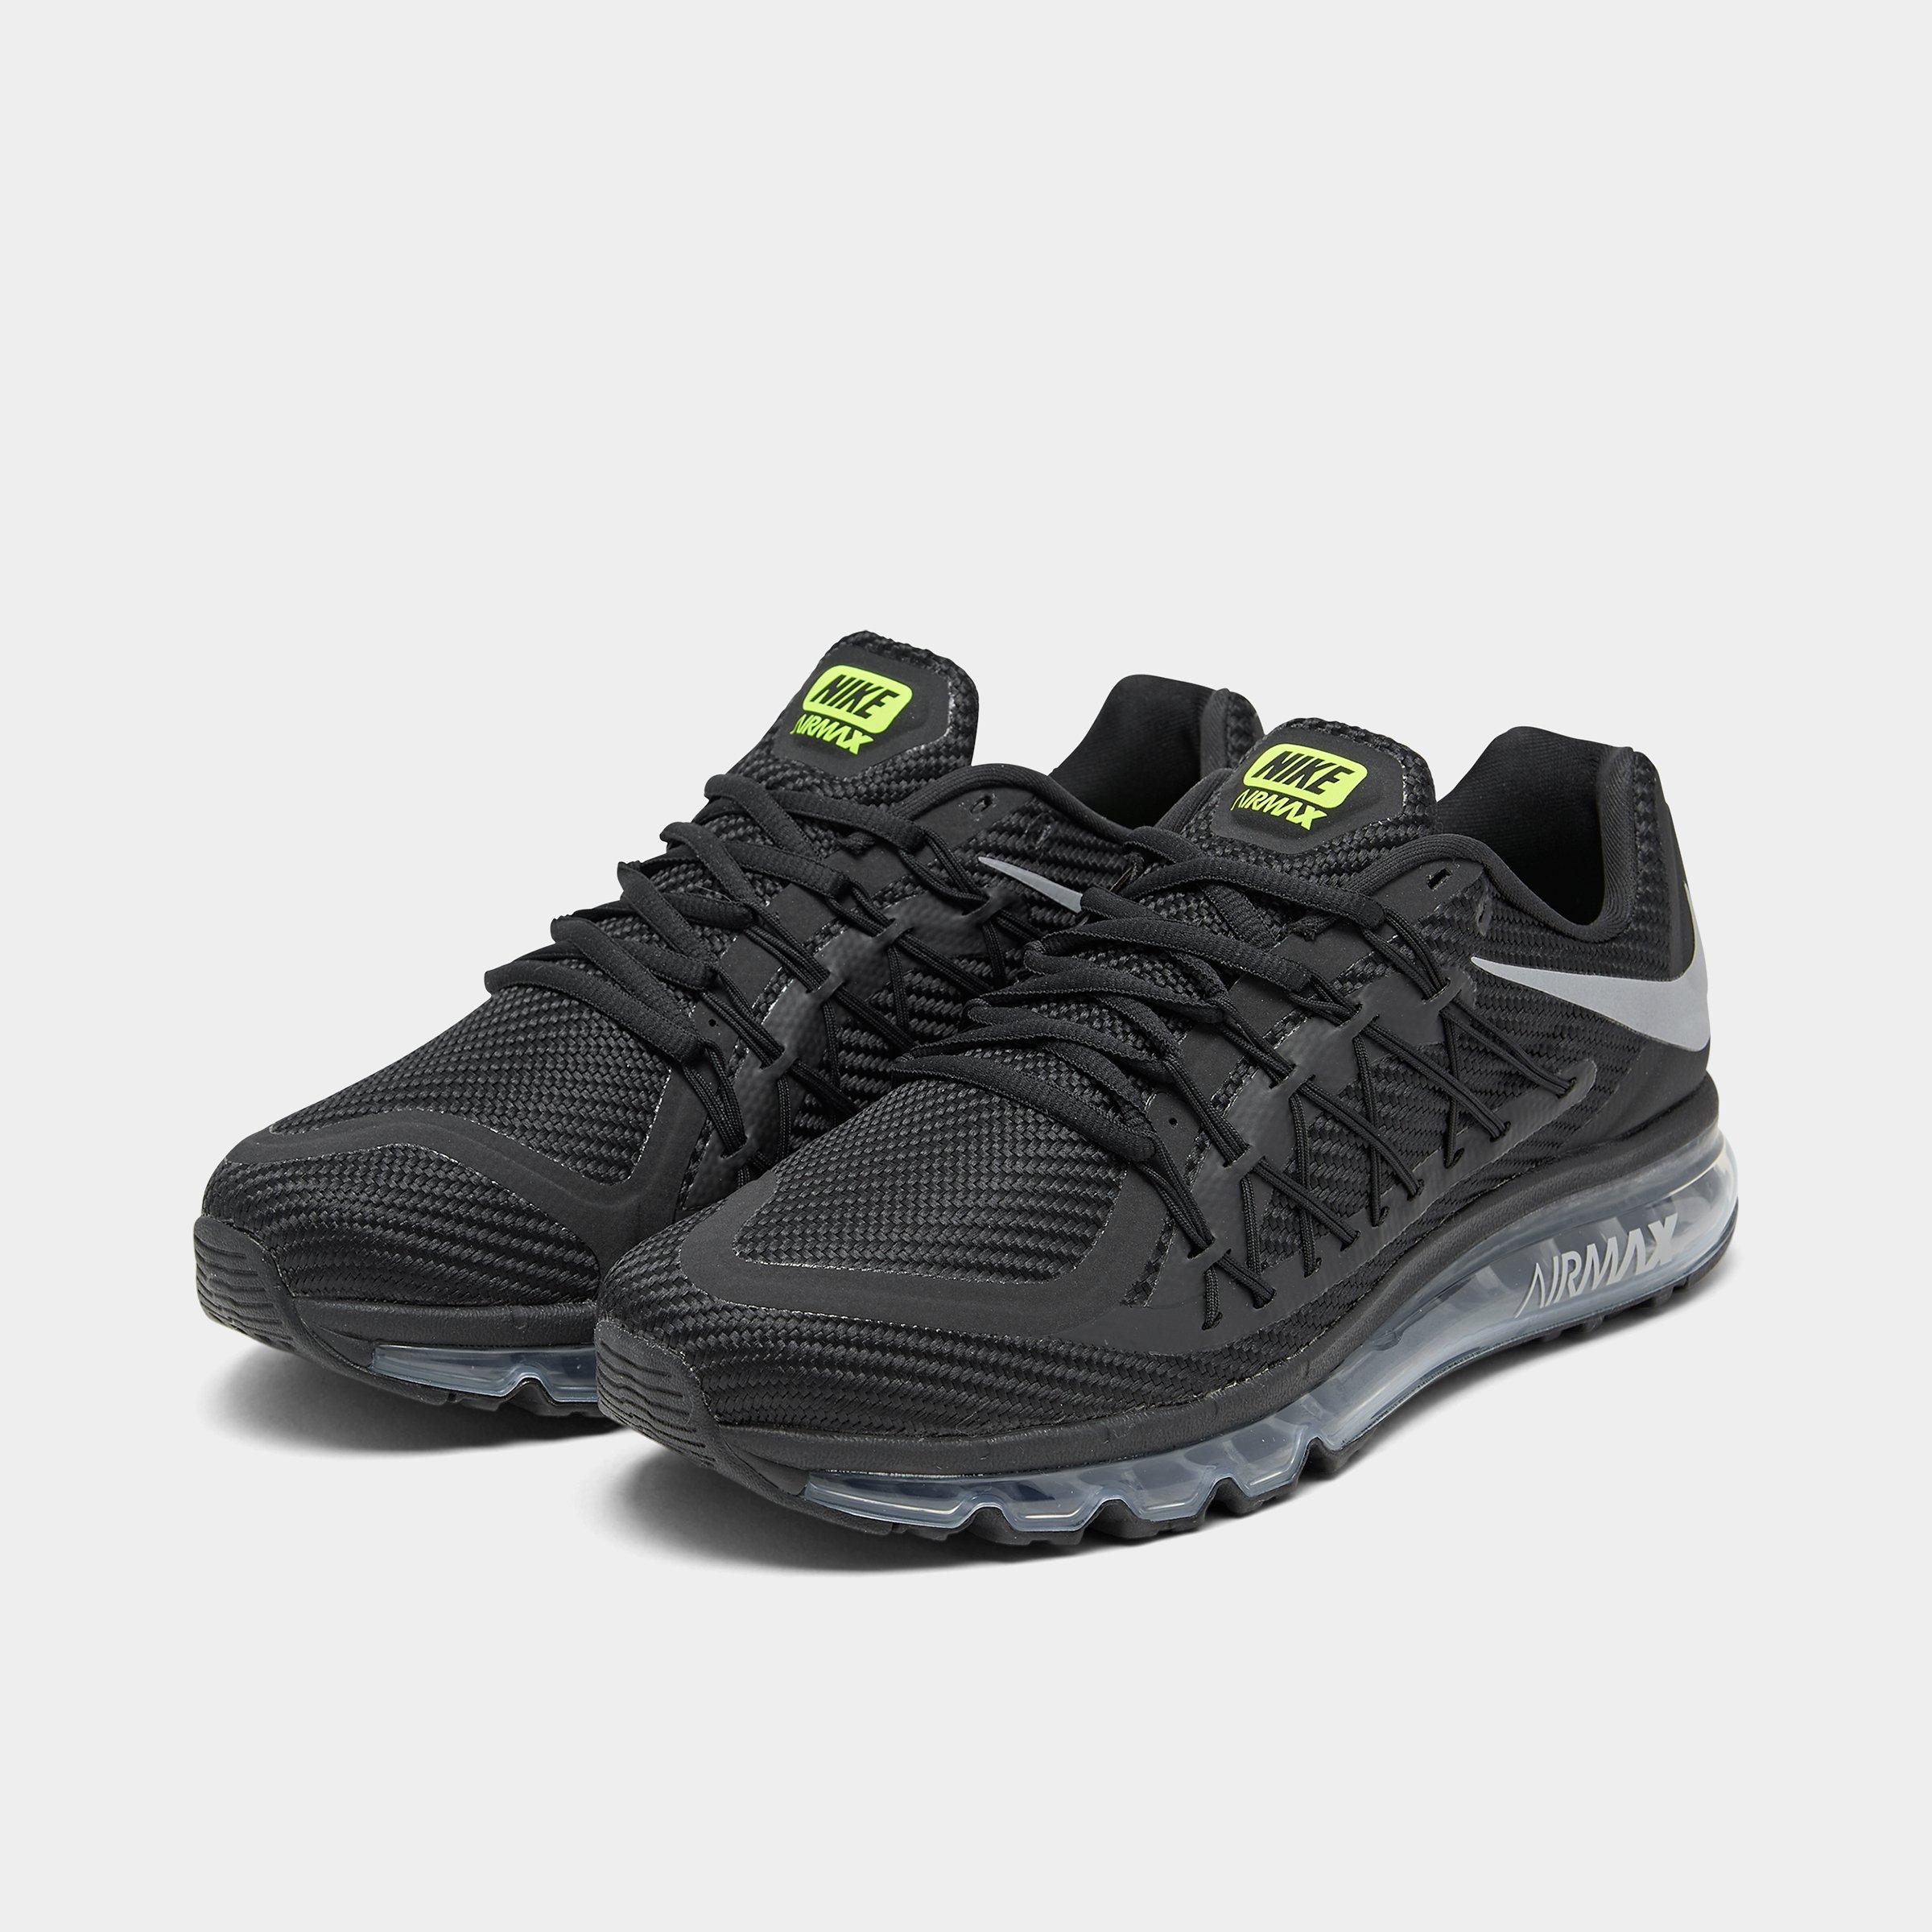 Men's Nike Air Max 2015 Running Shoes| Finish Line